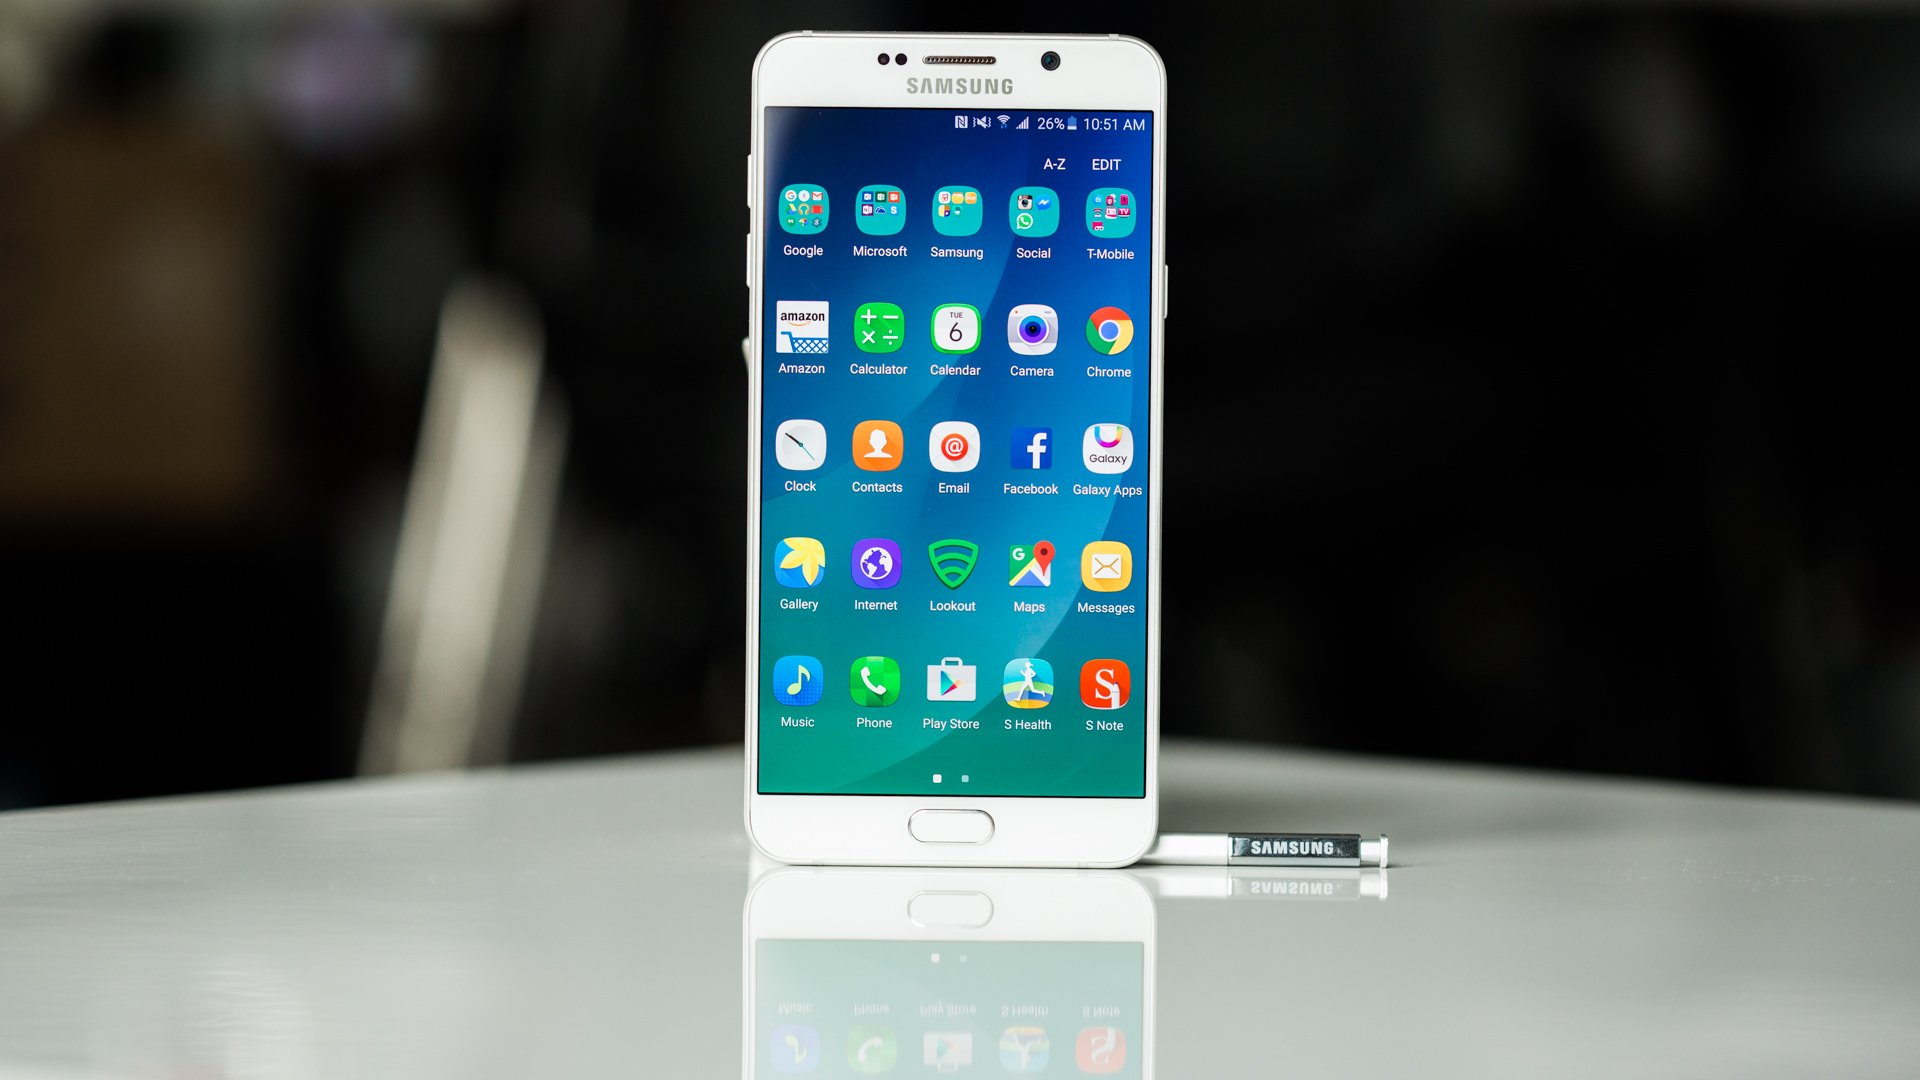 Samsung Galaxy Note 5: The premium combination of Extra tough 7000 series aluminum and Gorilla Glass 4